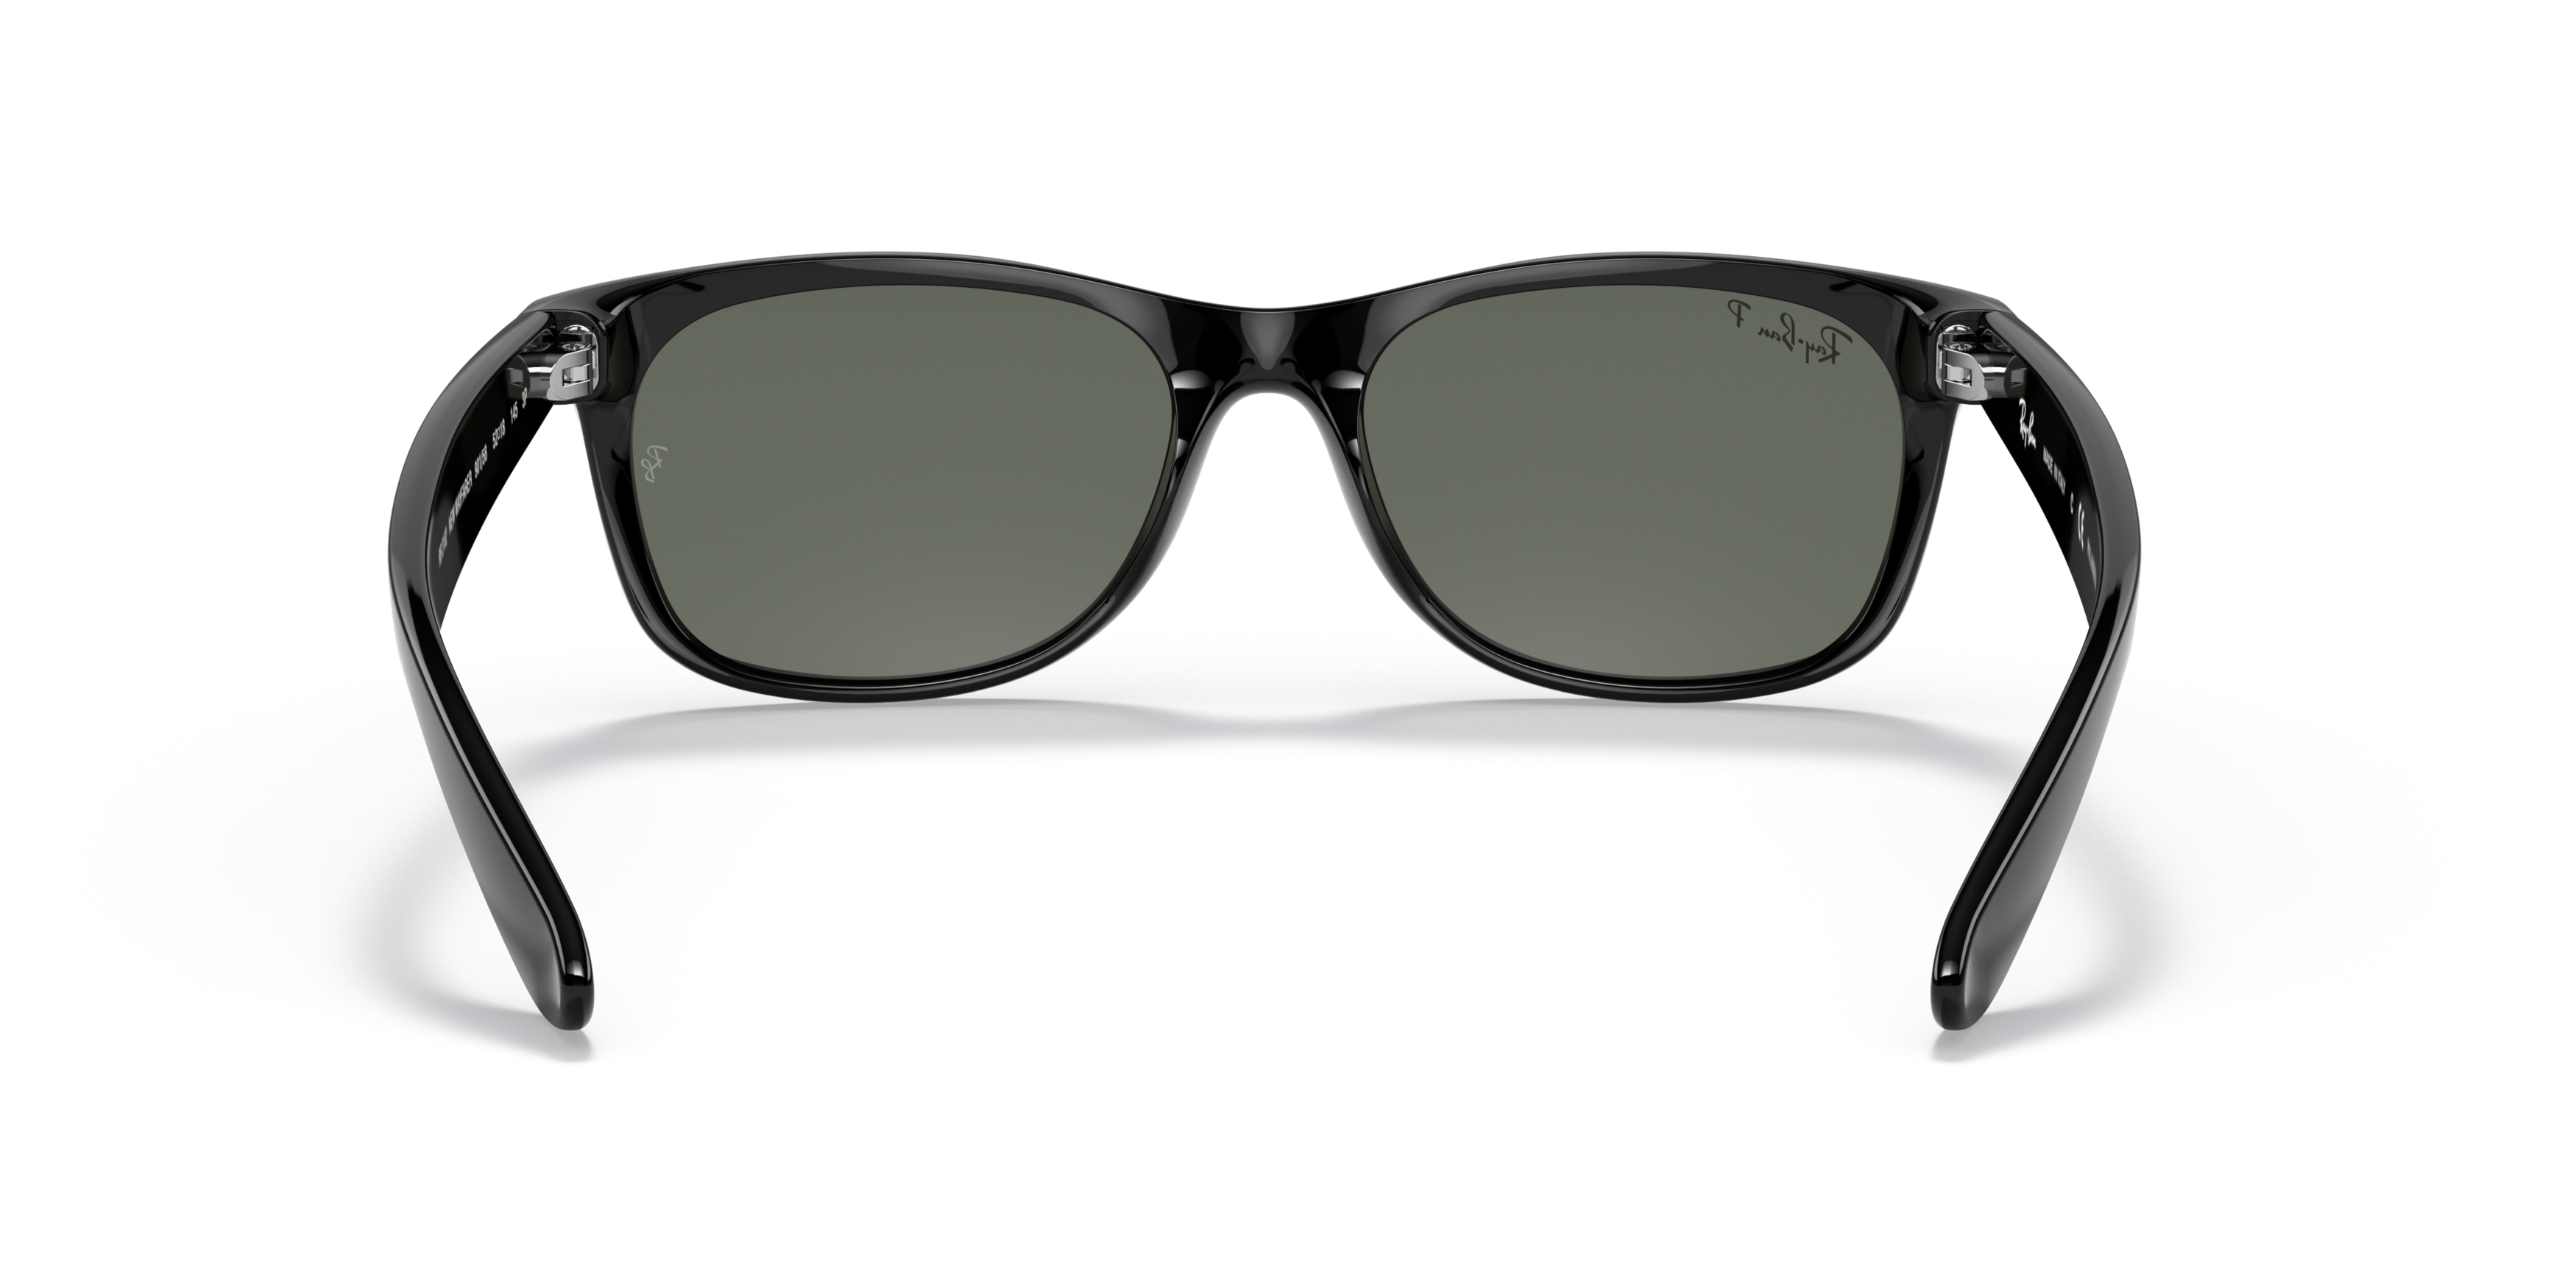 [products.image.detail02] Ray-Ban New Wayfarer Classic RB2132 901/58